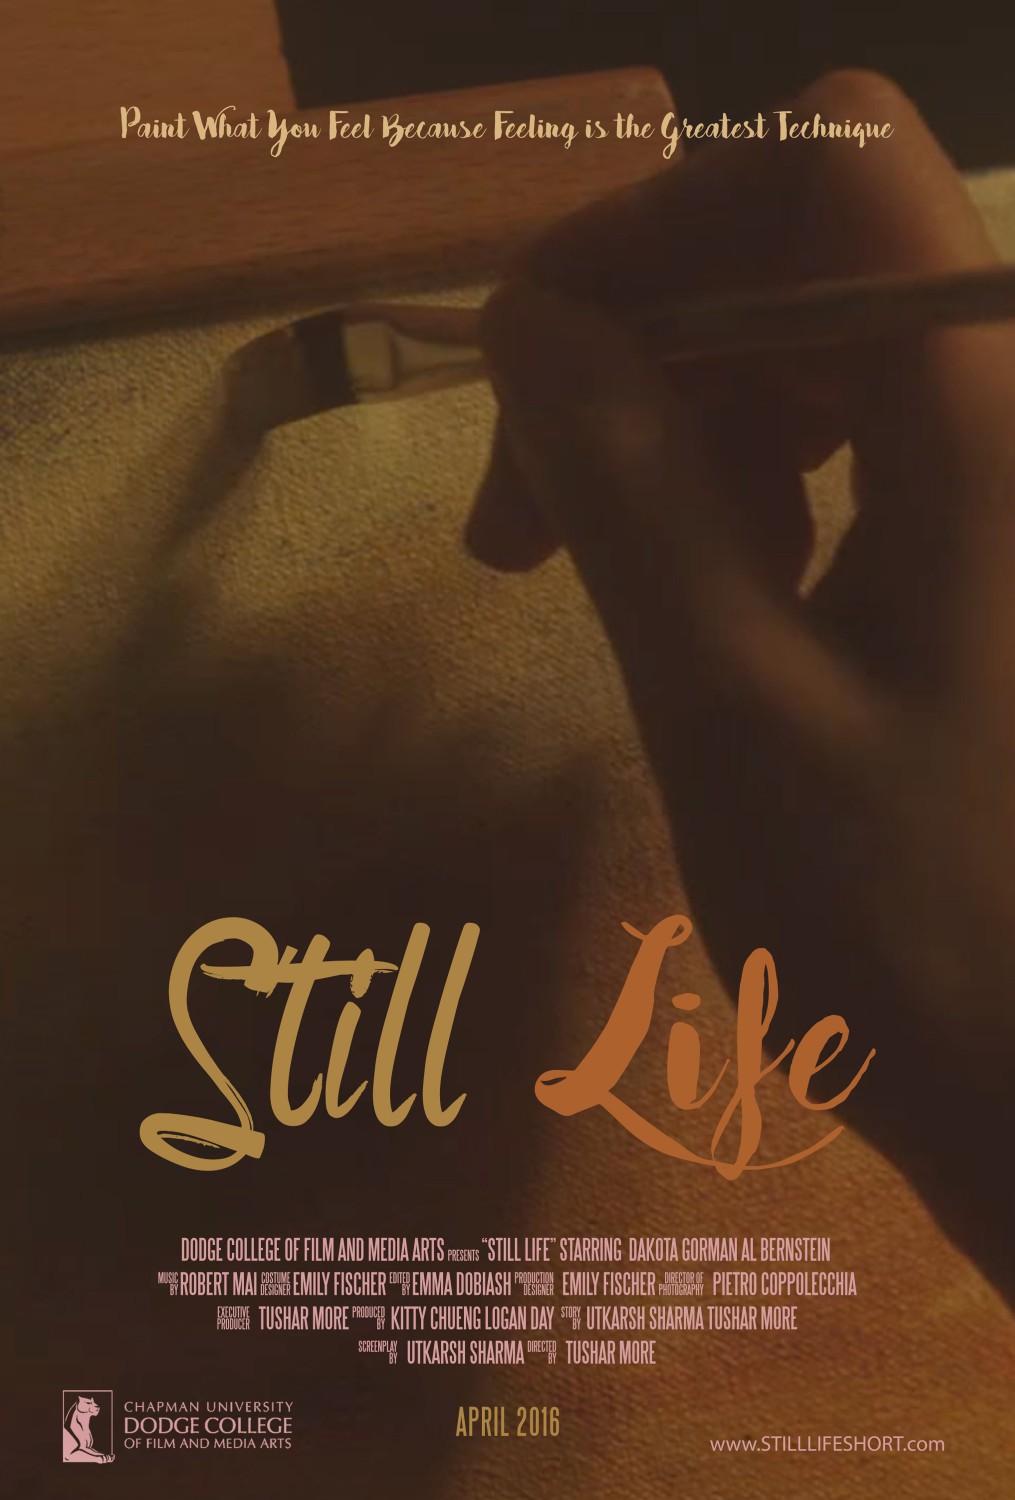 Extra Large Movie Poster Image for Still Life